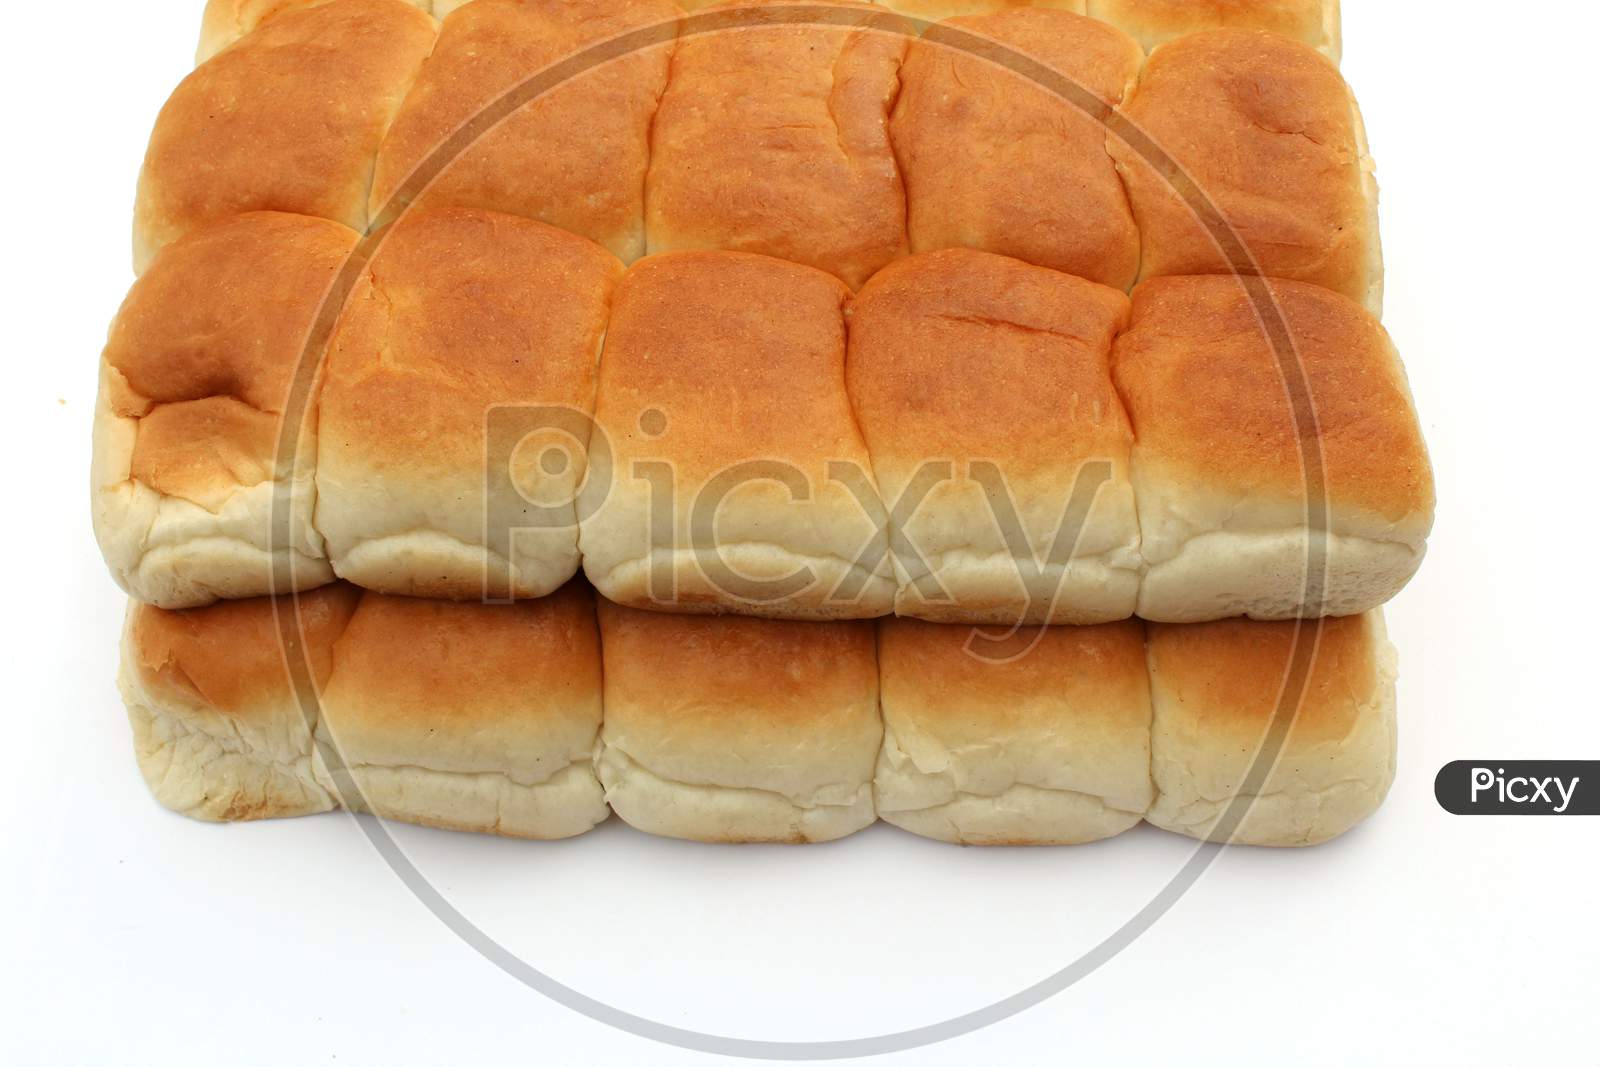 Bread, bakery icon, sliced fresh wheat bread isolated on white background